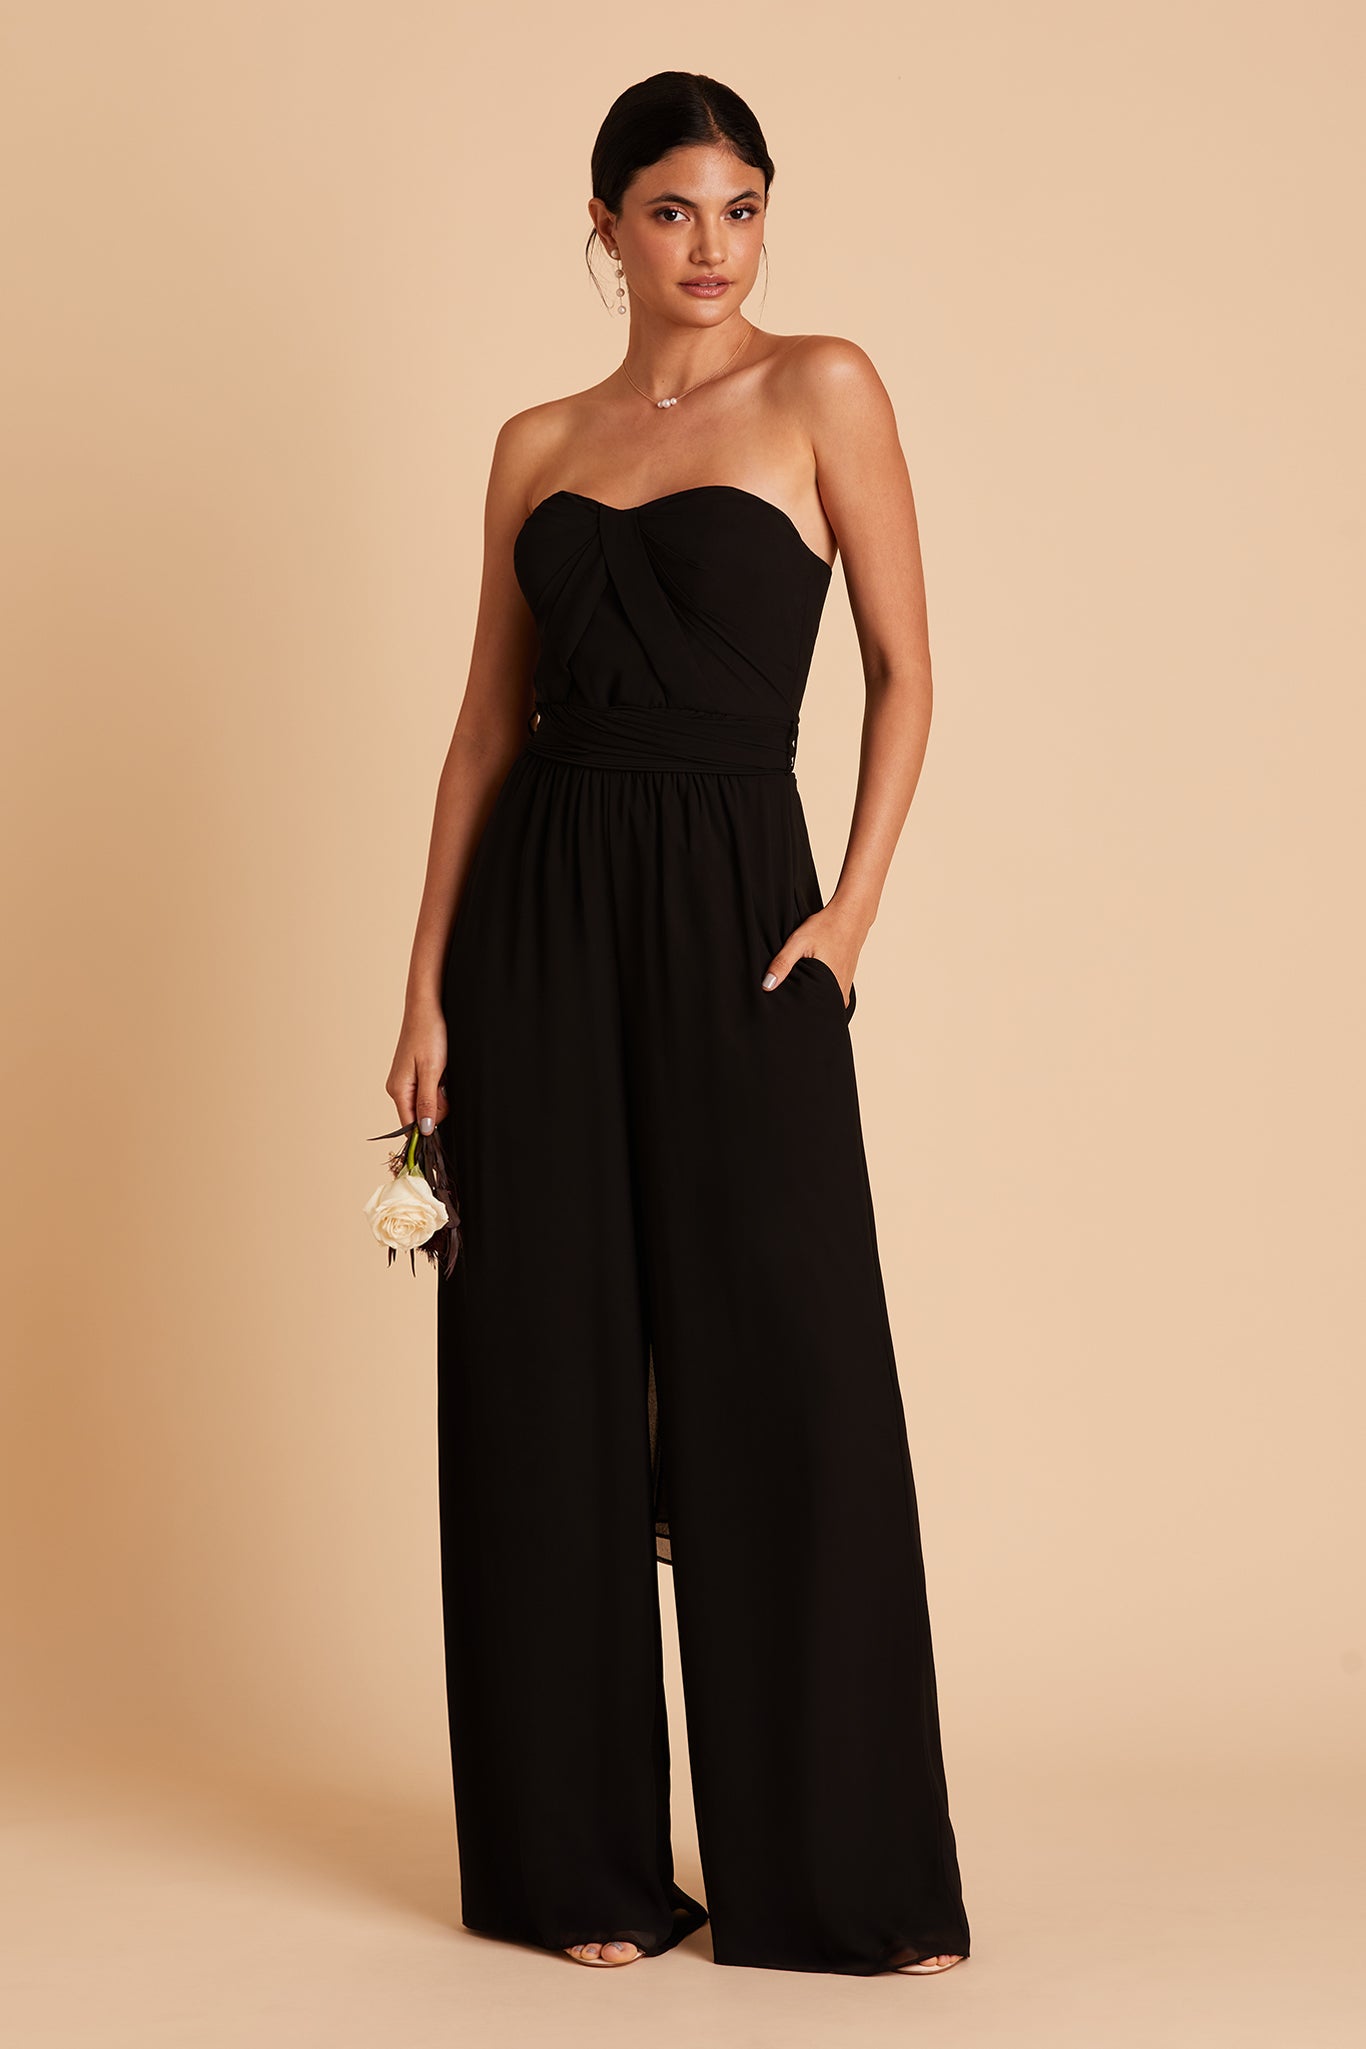 Gigi convertible jumpsuit in black chiffon by Birdy Grey, front view